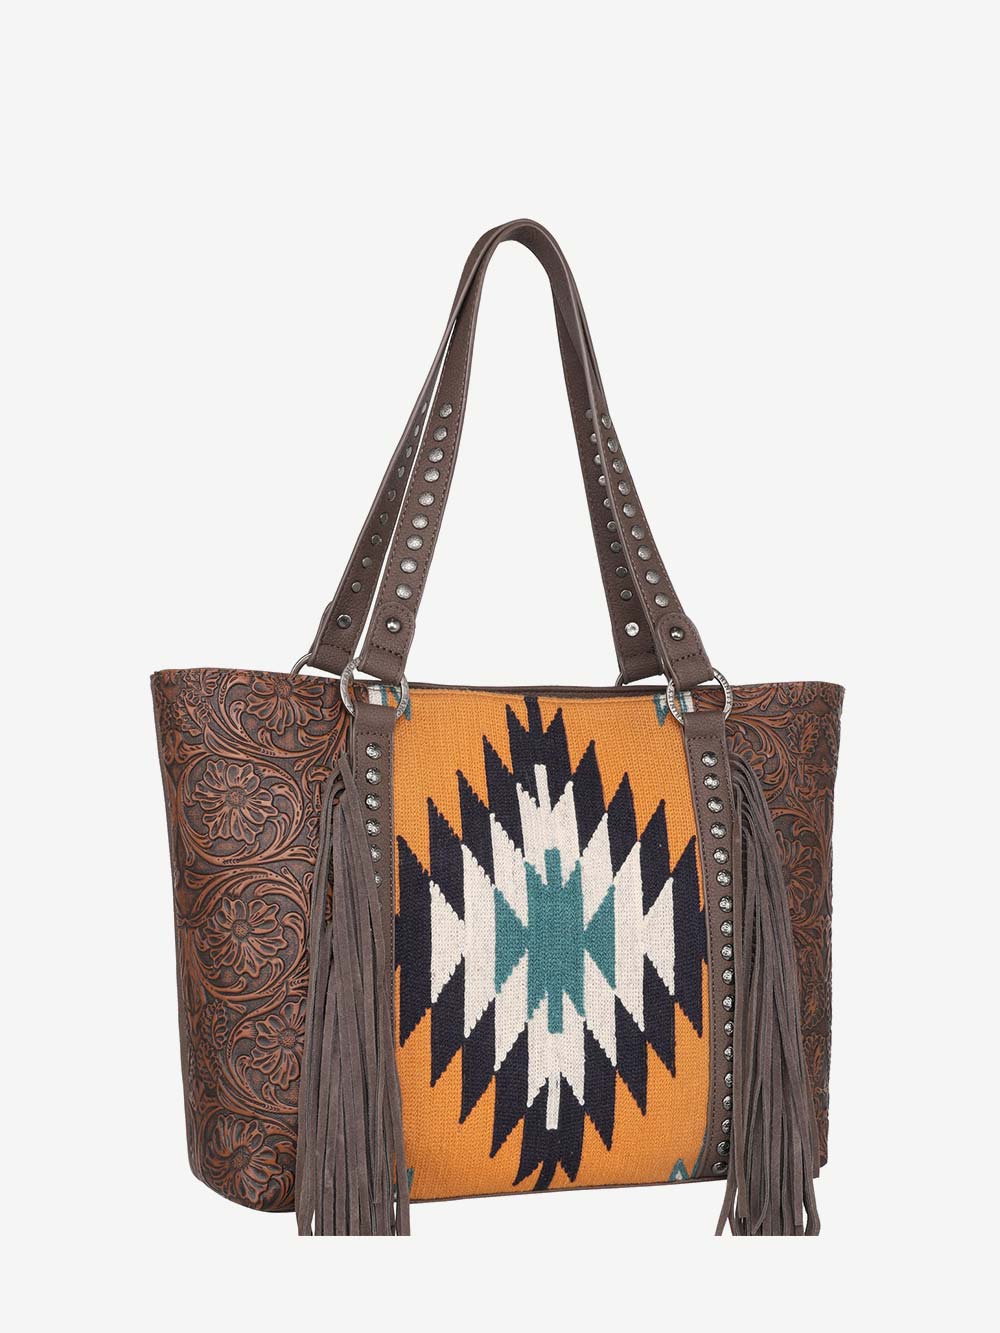 Trinity Ranch Leather Fringe Floral Embossed Concealed Carry Tote - Montana West World